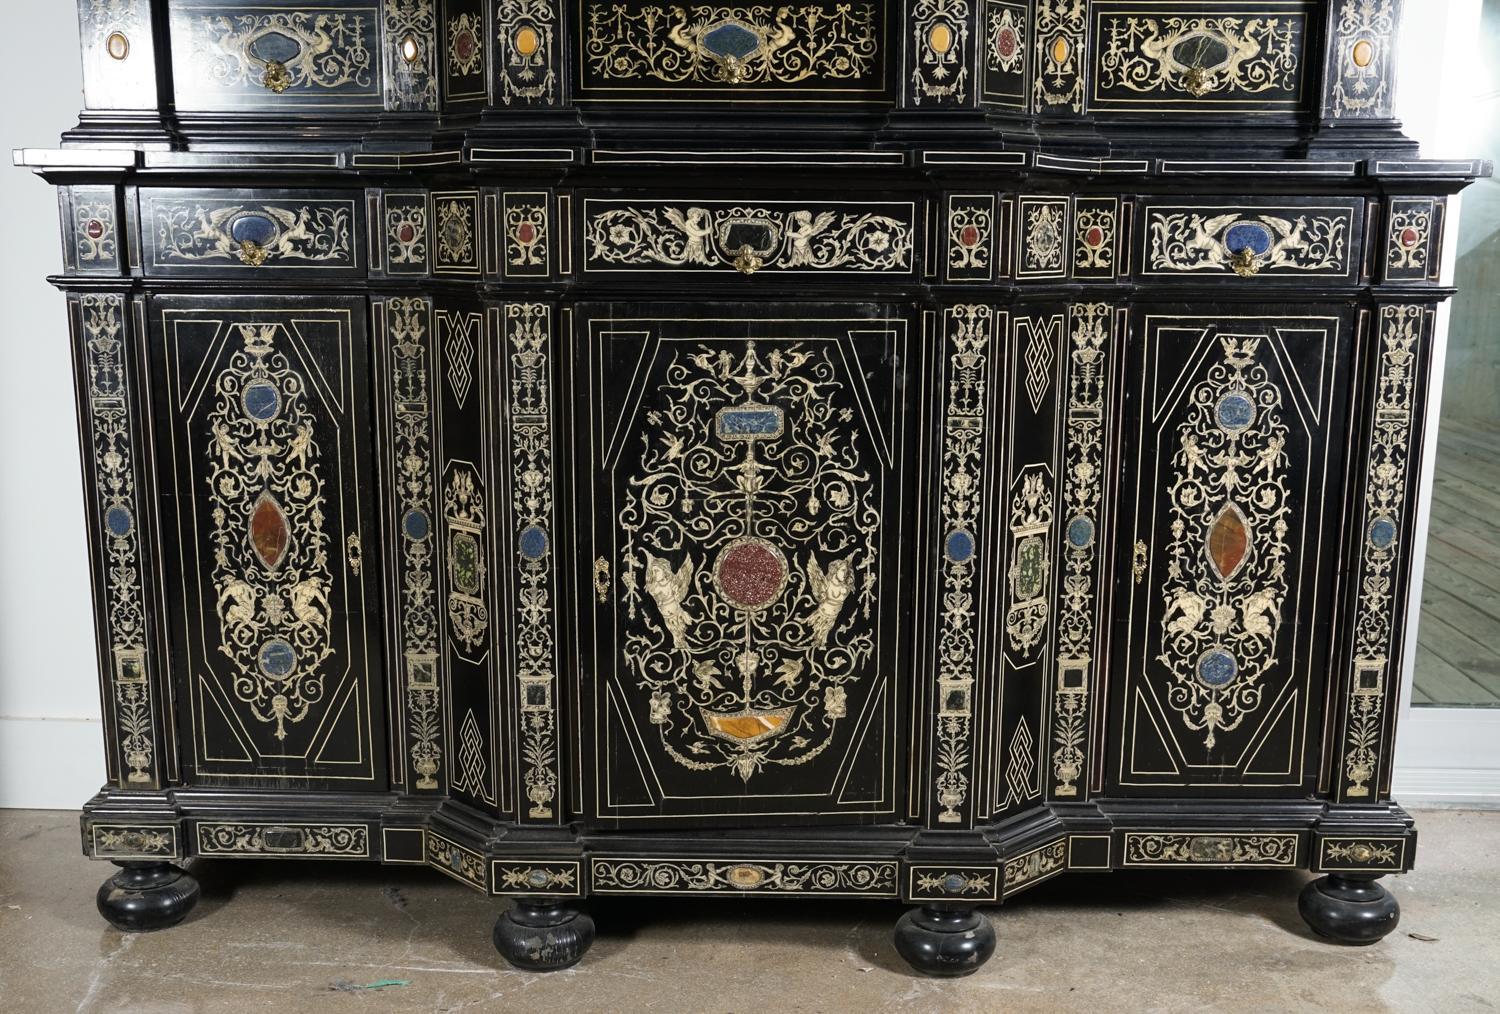 Extremely fine Italian Baroque ebonized wood, faux ivory, and hardstone cabinet, Florence, 20th century.

Decorated overall with Berainesque (light arabesques and playful grotesques) motifs including rinceaux, putti and mythical birds, and inlaid